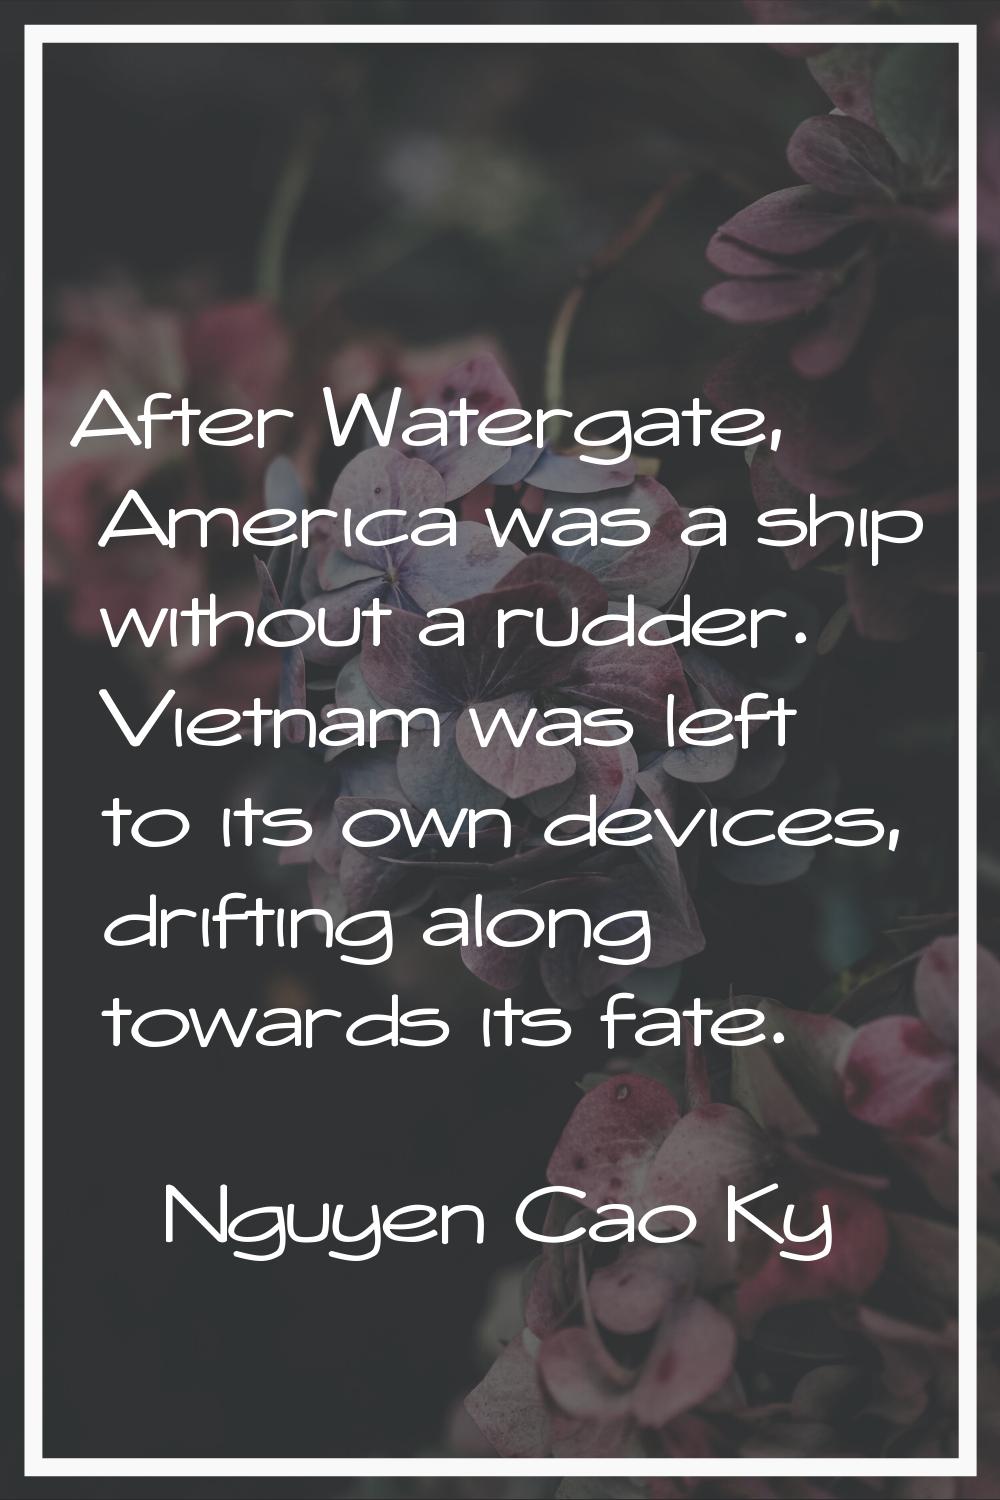 After Watergate, America was a ship without a rudder. Vietnam was left to its own devices, drifting